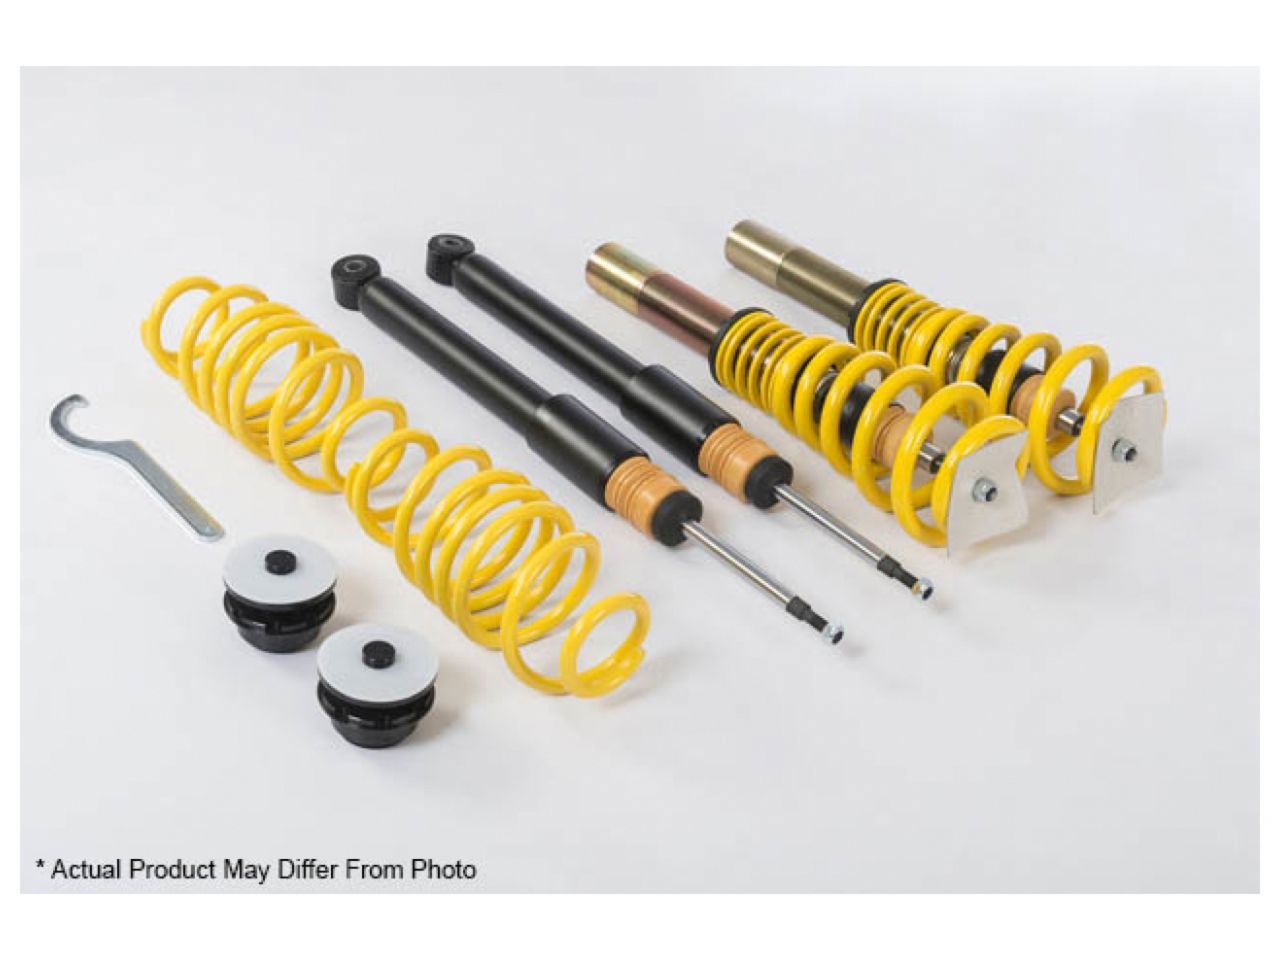 ST Suspensions Coilover Kits 13220062 Item Image